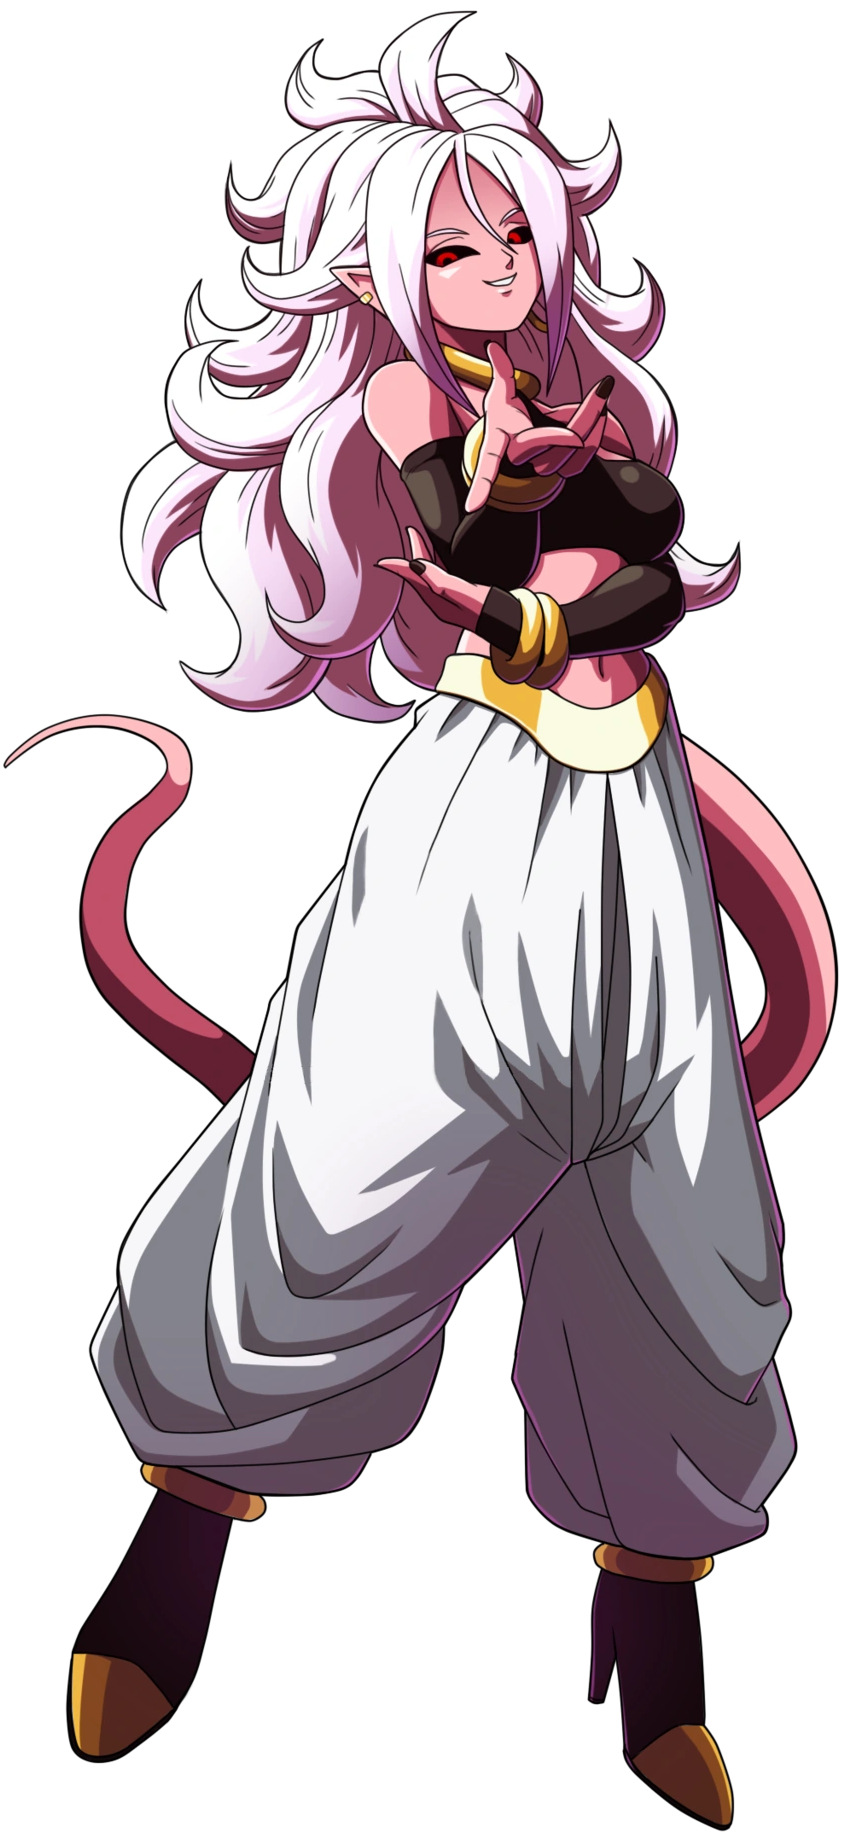 Android 21 Villains Wiki Fandom Powered By Wikia